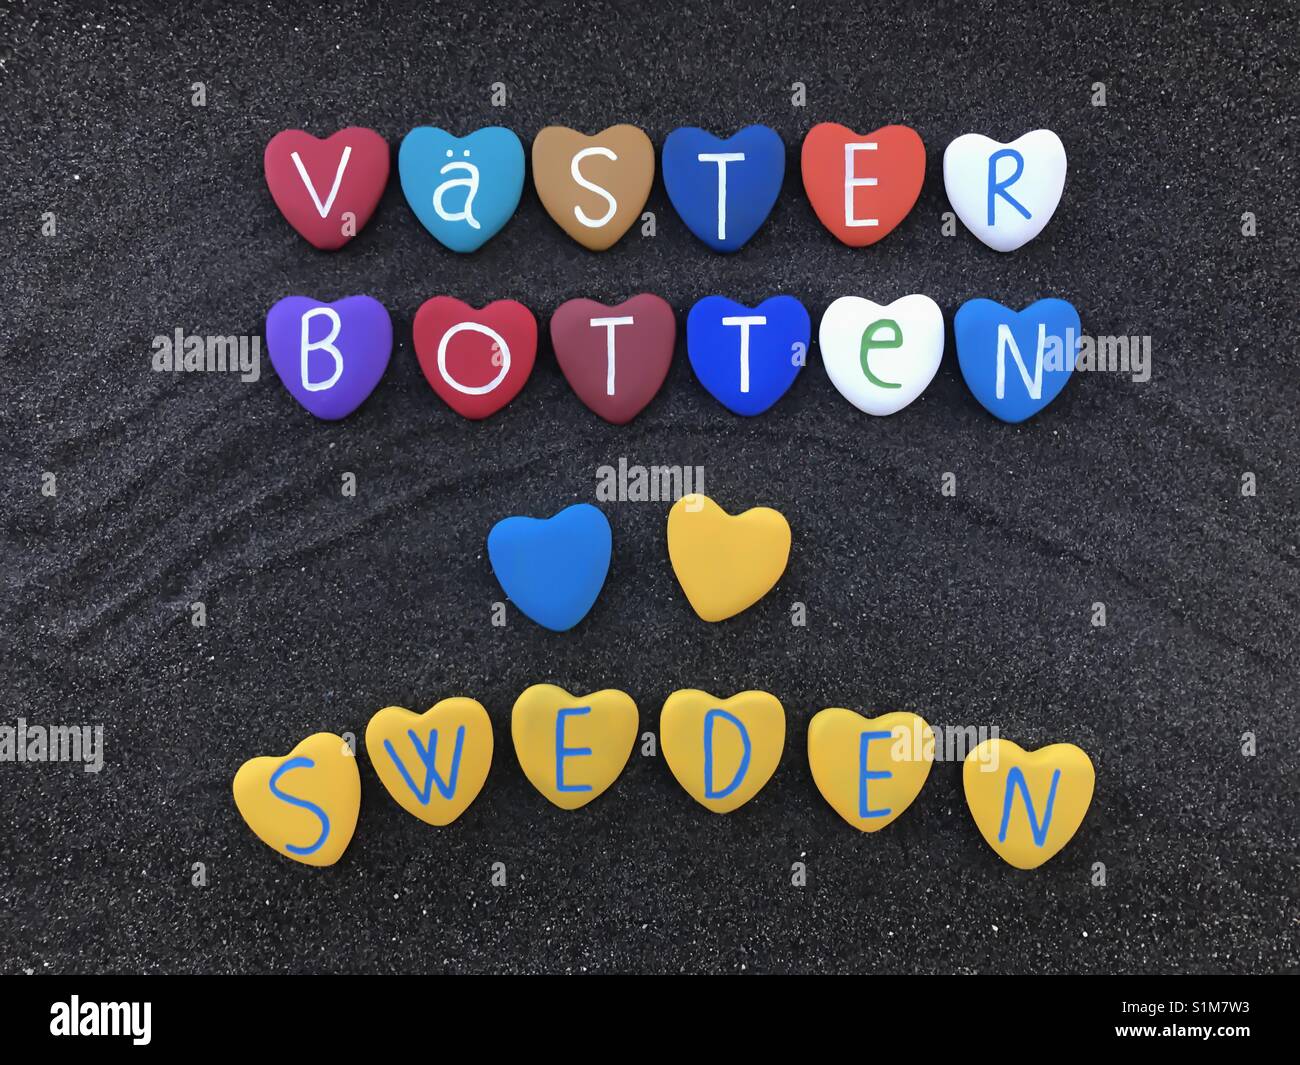 Västerbotten County, Sweden, souvenir with a composition of colored heart stones over black volcanic sand Stock Photo